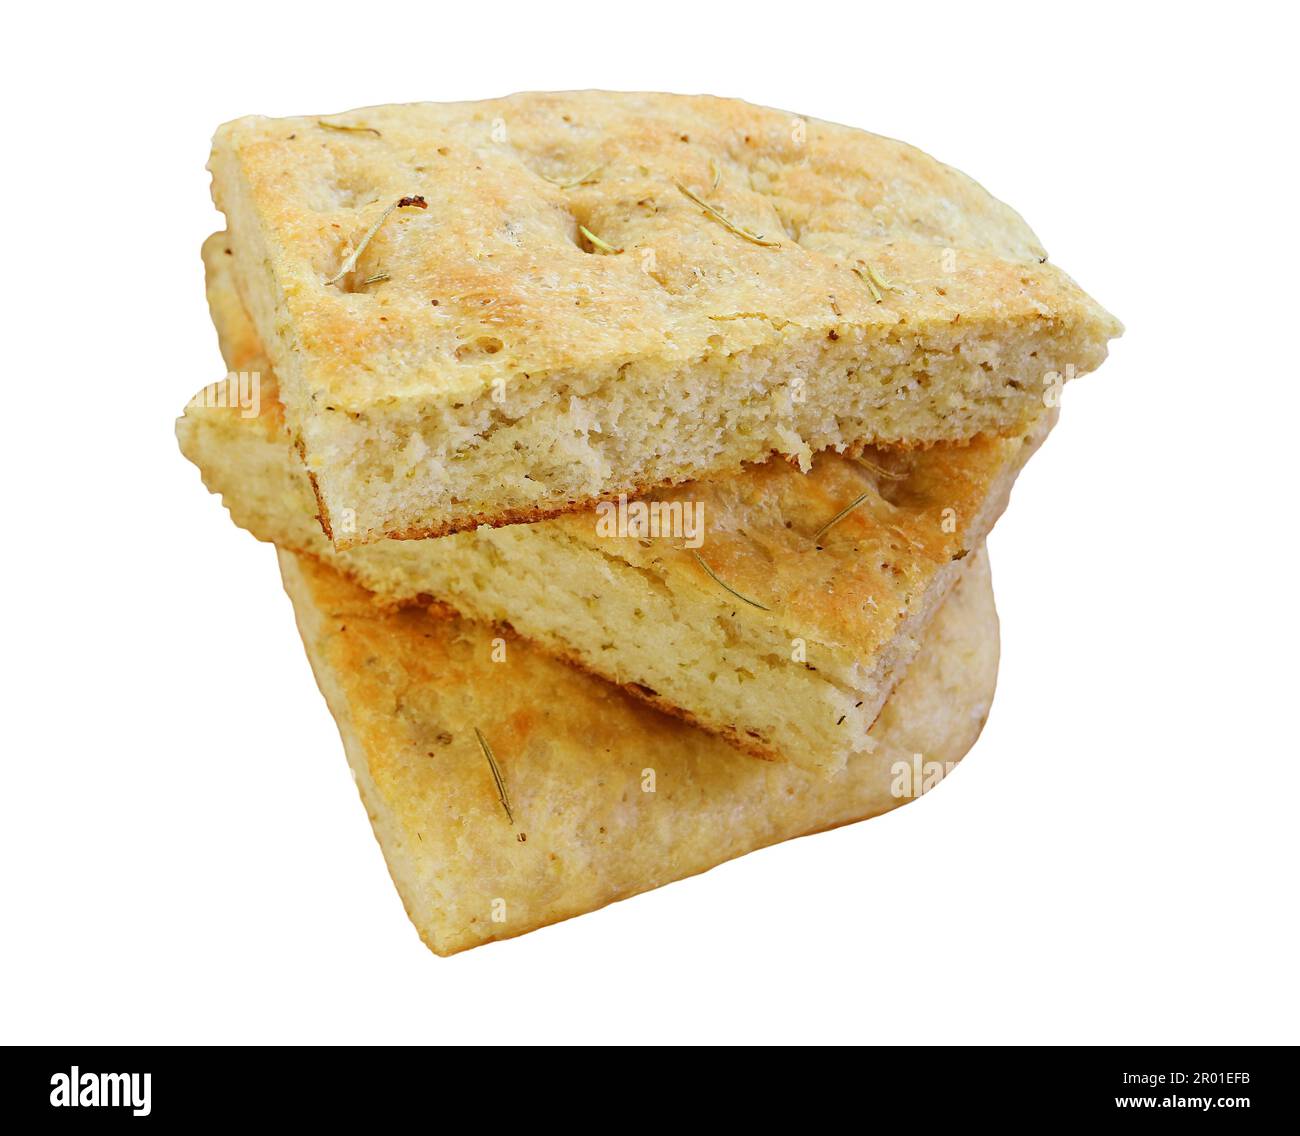 Stack of Focaccia Bread Slices Isolated on White Backdrop Stock Photo